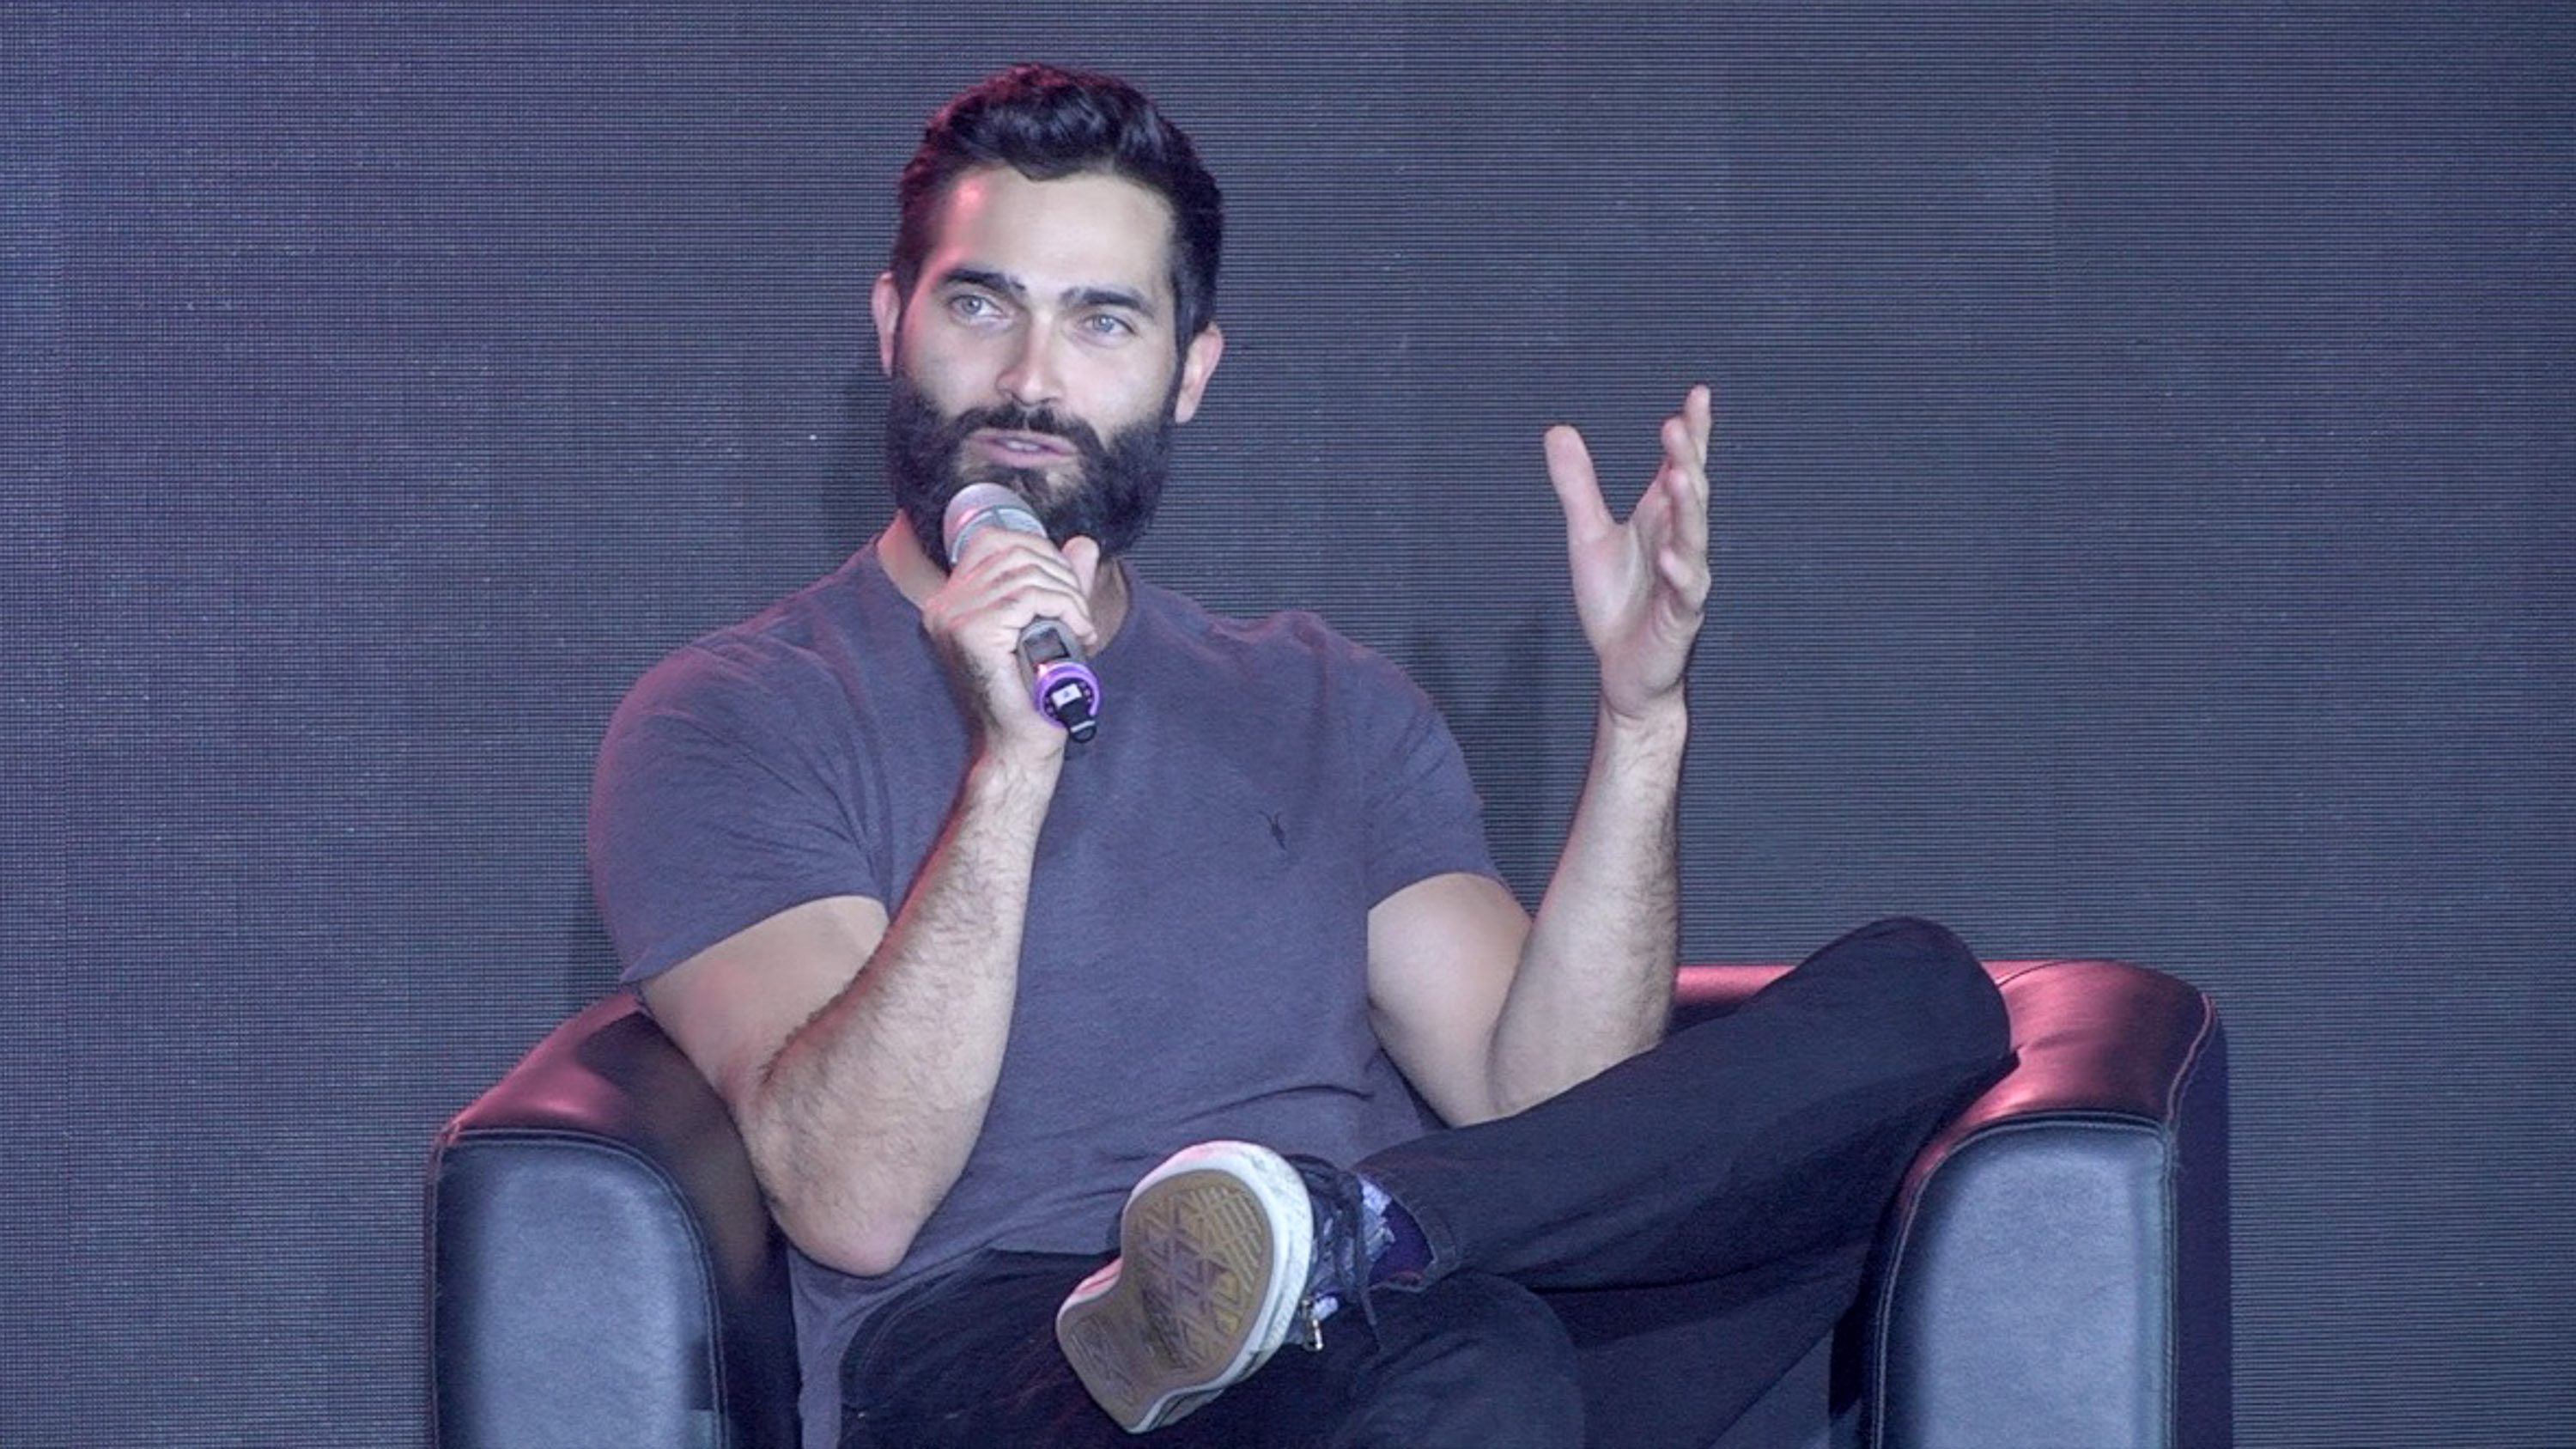 TYLER HOECHLIN. The 'Supergirl' star talks to fans at the AsiaPOP Comic Con Manila 2017. 